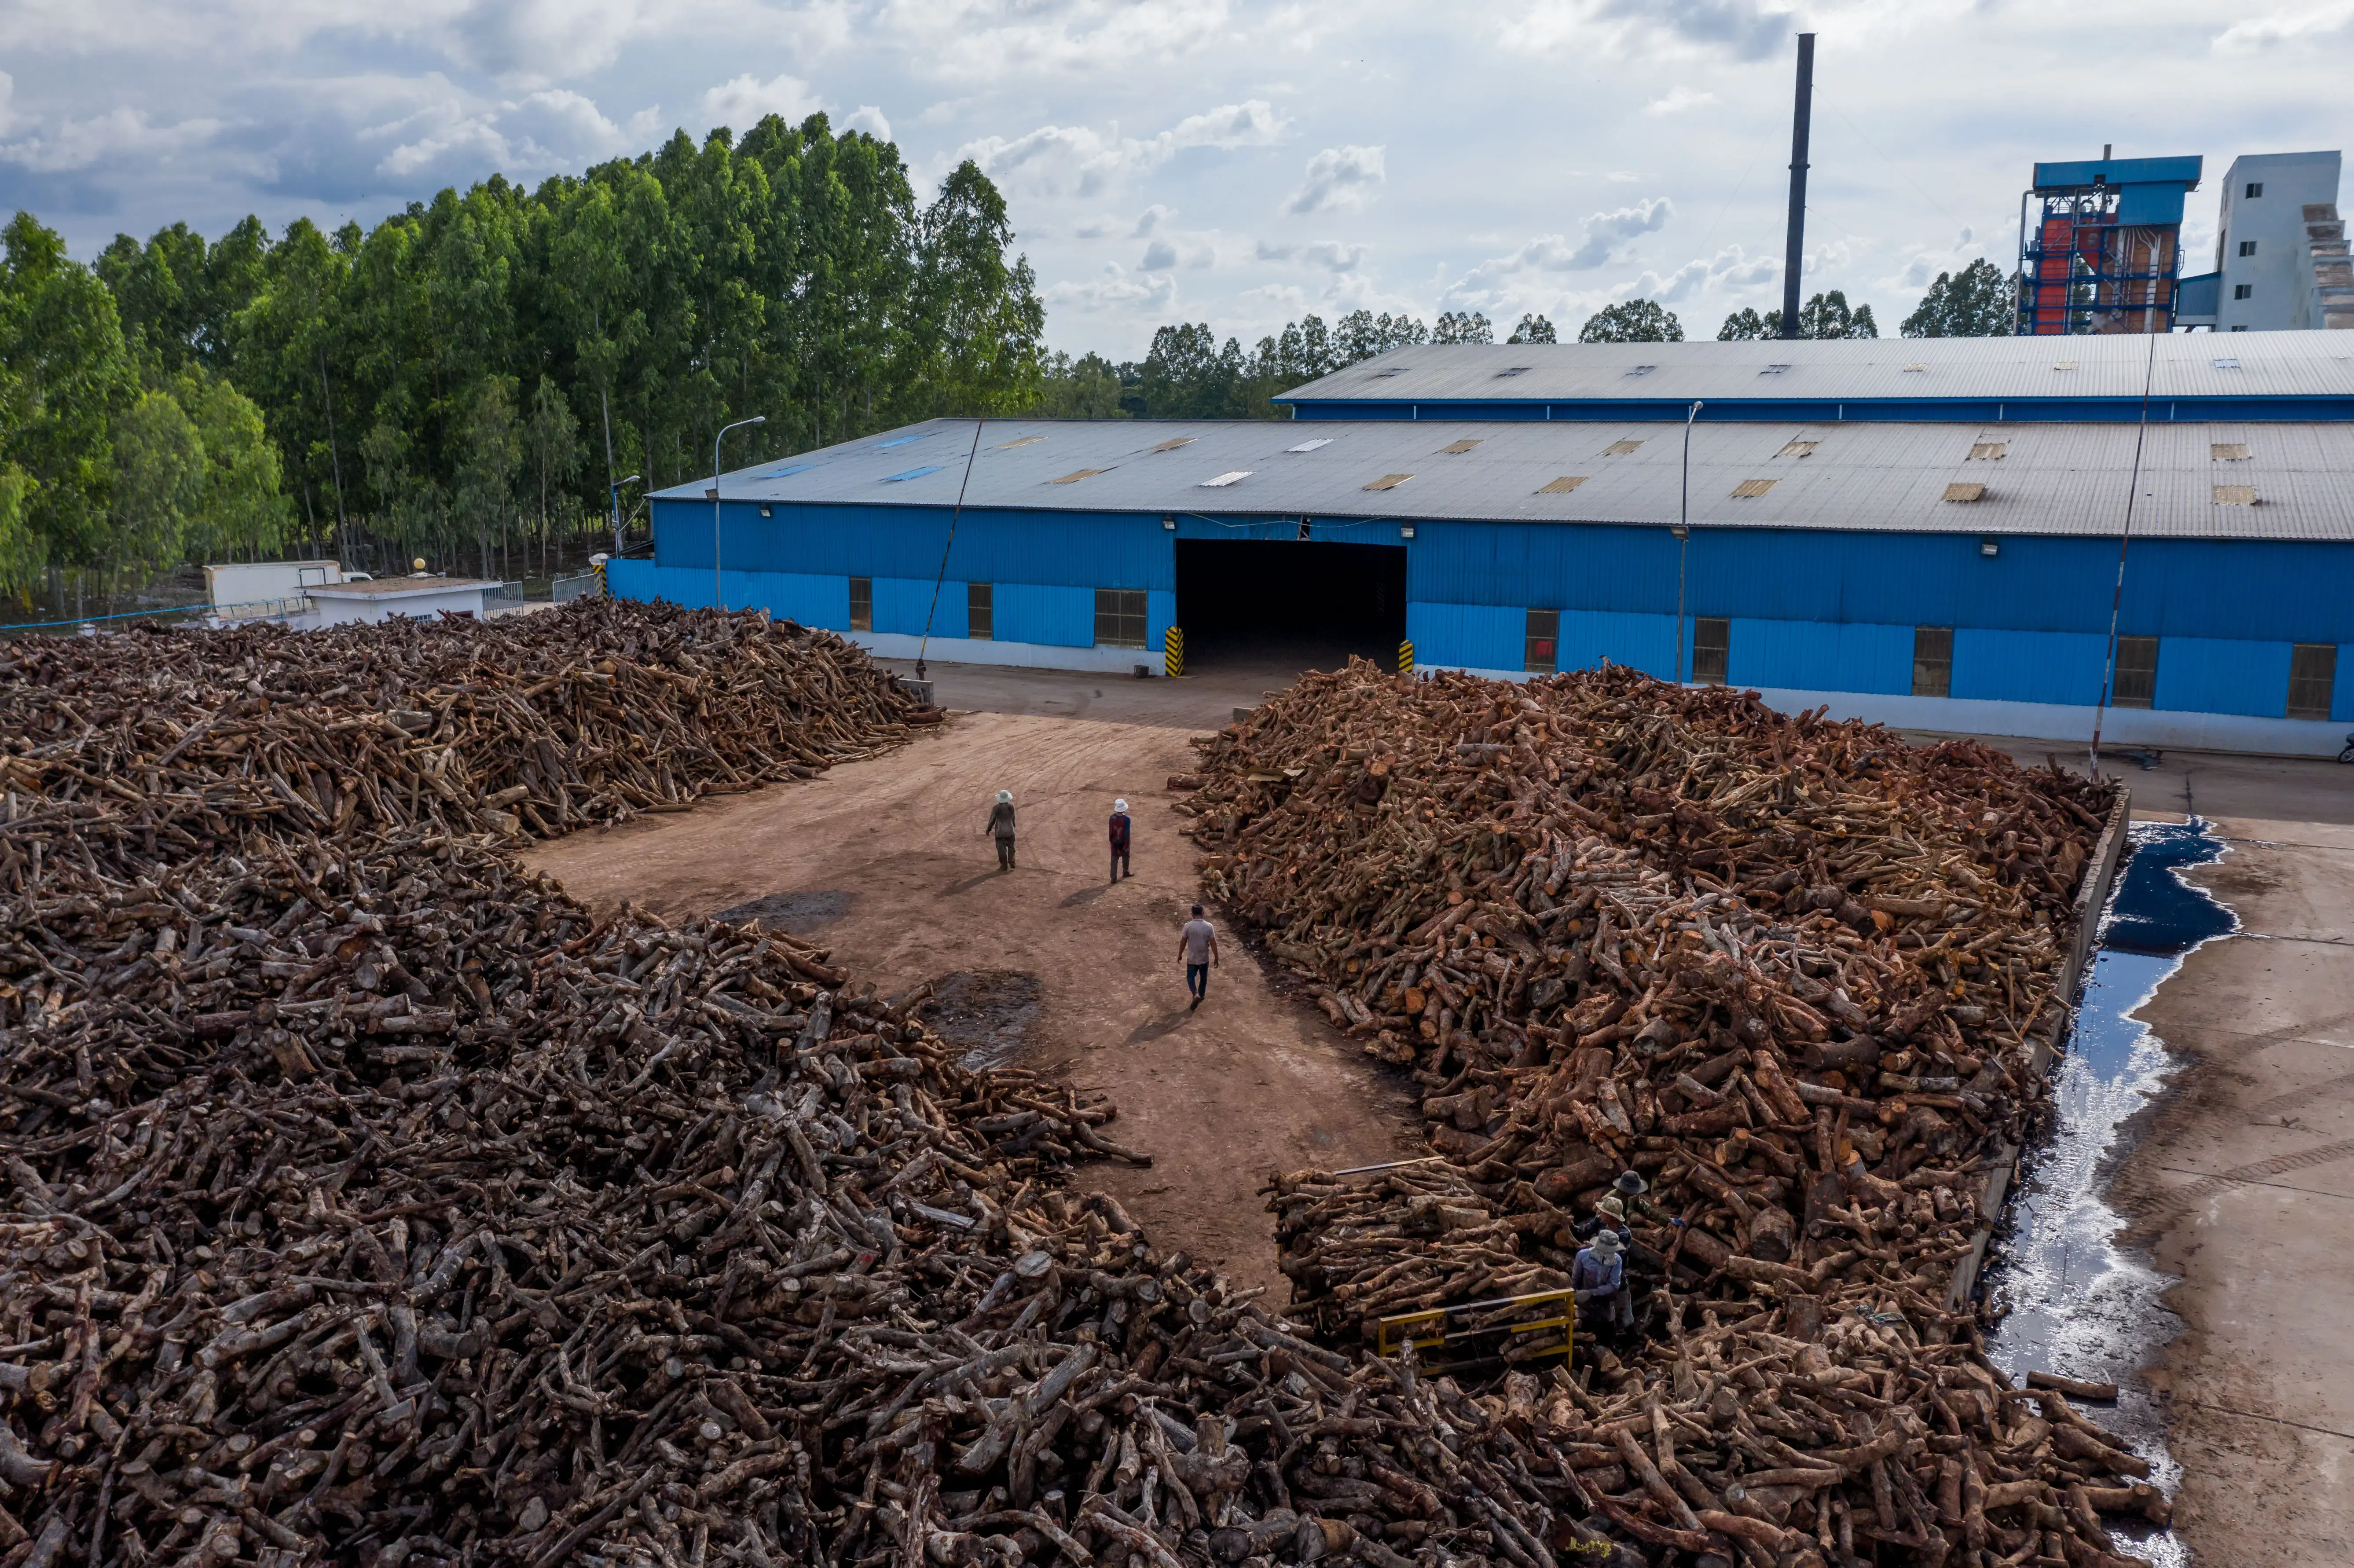 Goldfame Star Enterprises in Kandal province has one of the largest timber depots of any garment factory in Cambodia, but Catherine Chan - director of Goldfame Group - has repeatedly refuse to disclose the source of the timber. Credit: Andy Ball/Mongabay.